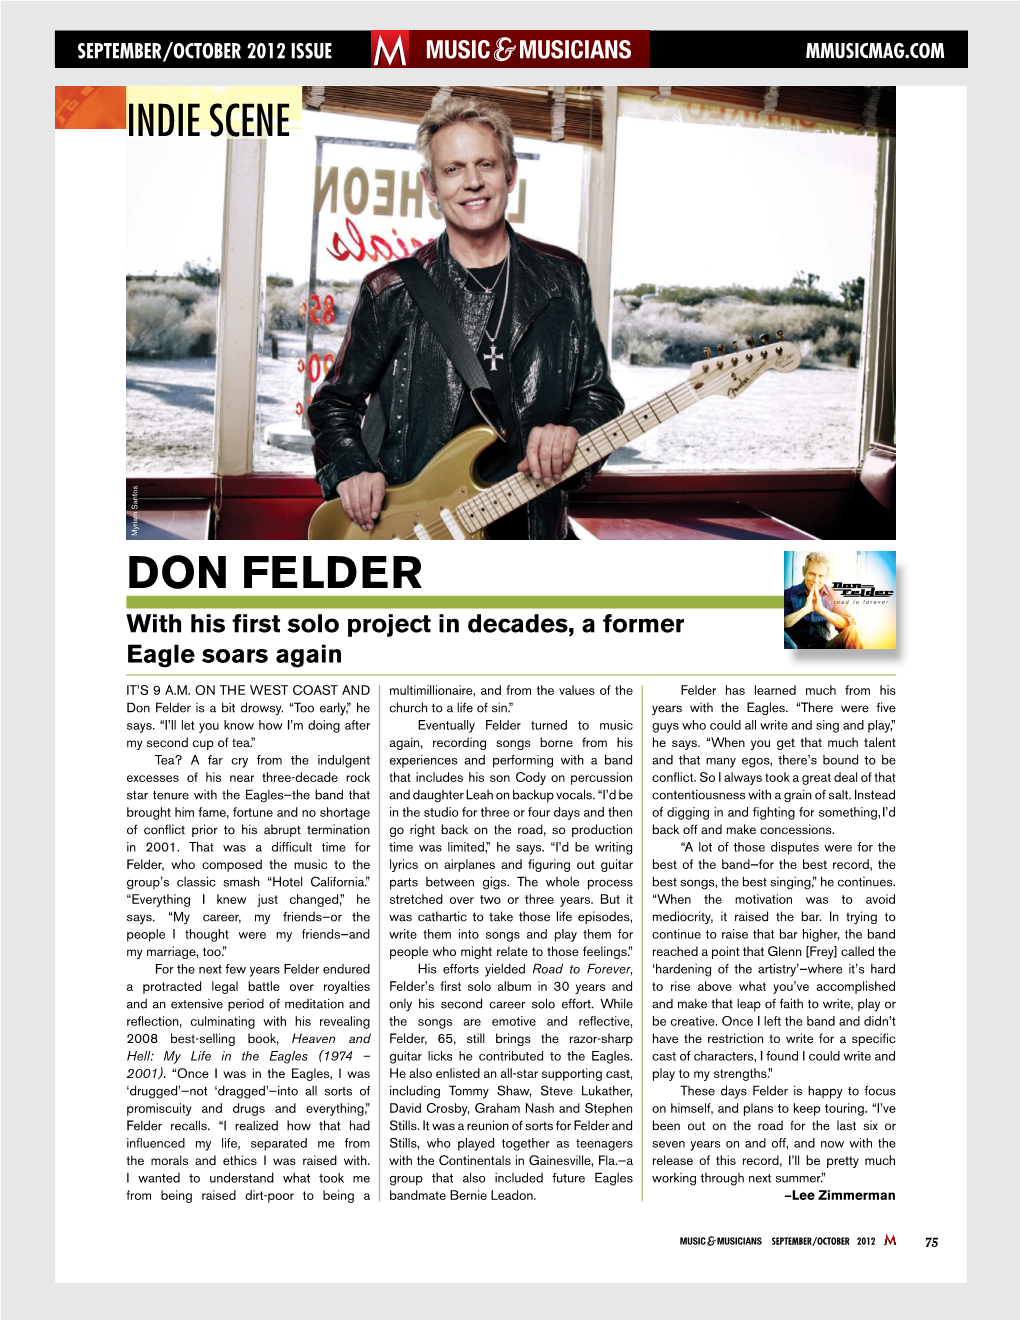 Don Felder with His First Solo Project in Decades, a Former Eagle Soars Again